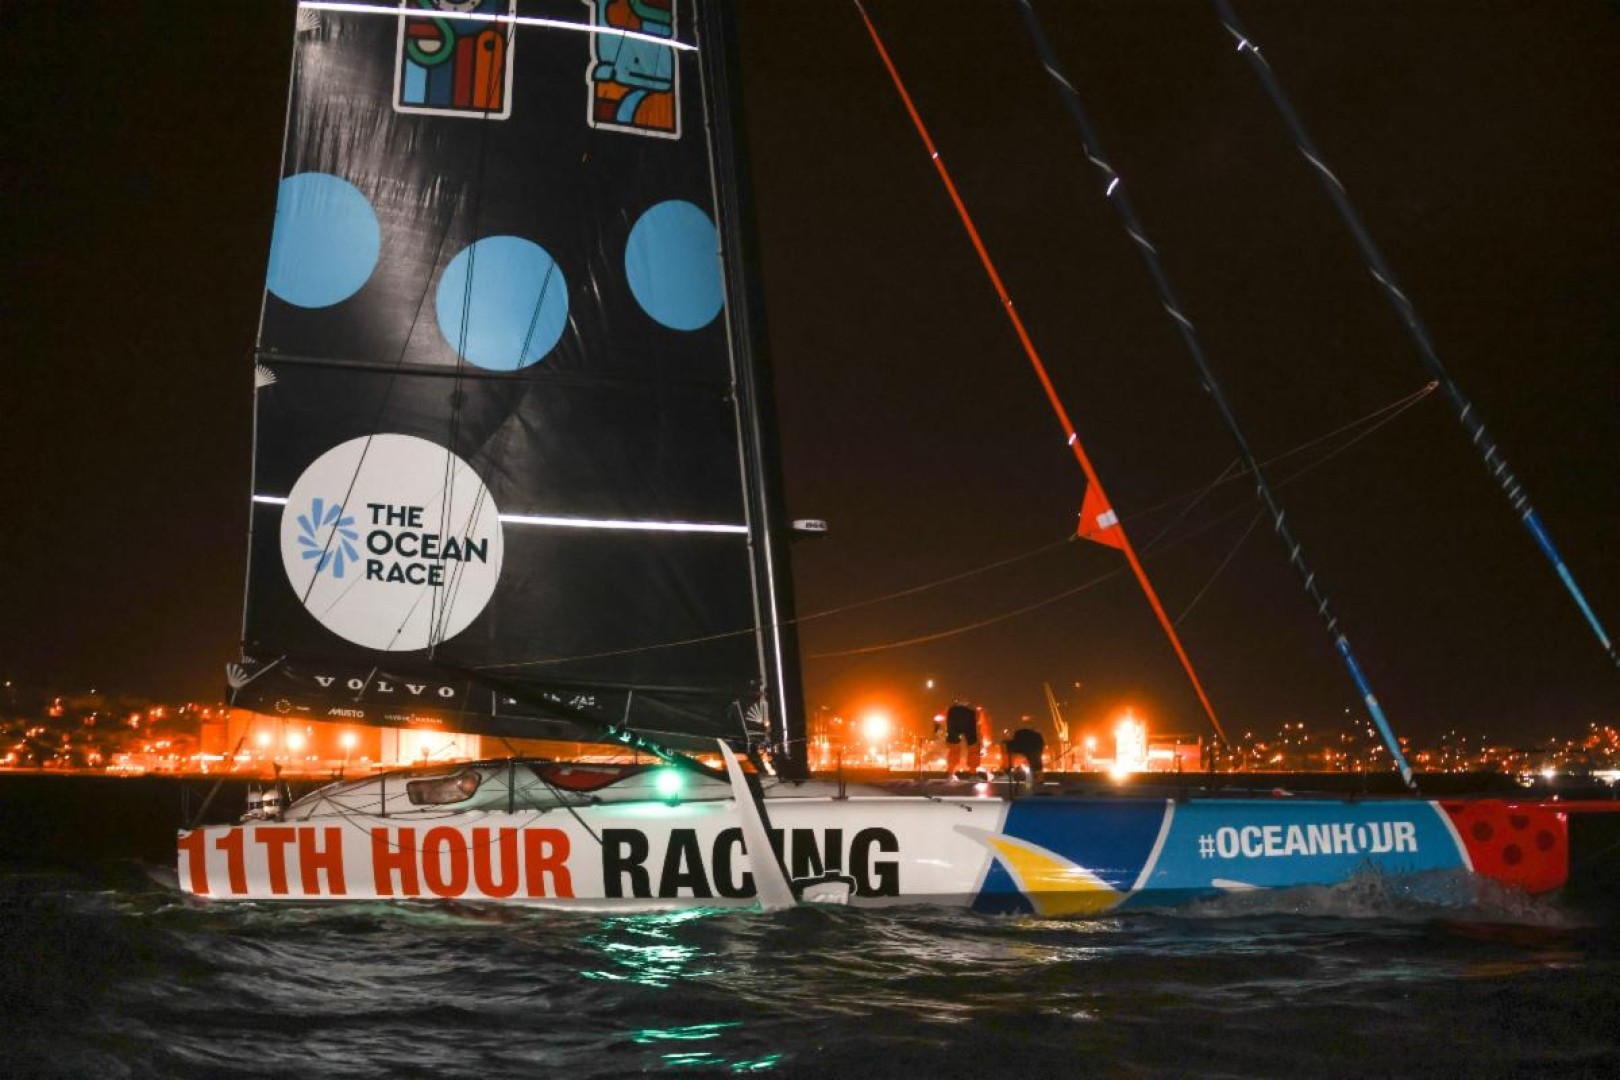 11th Hour Racing Team claims second place for Leg 1 of The Ocean Race © Sailing Energy